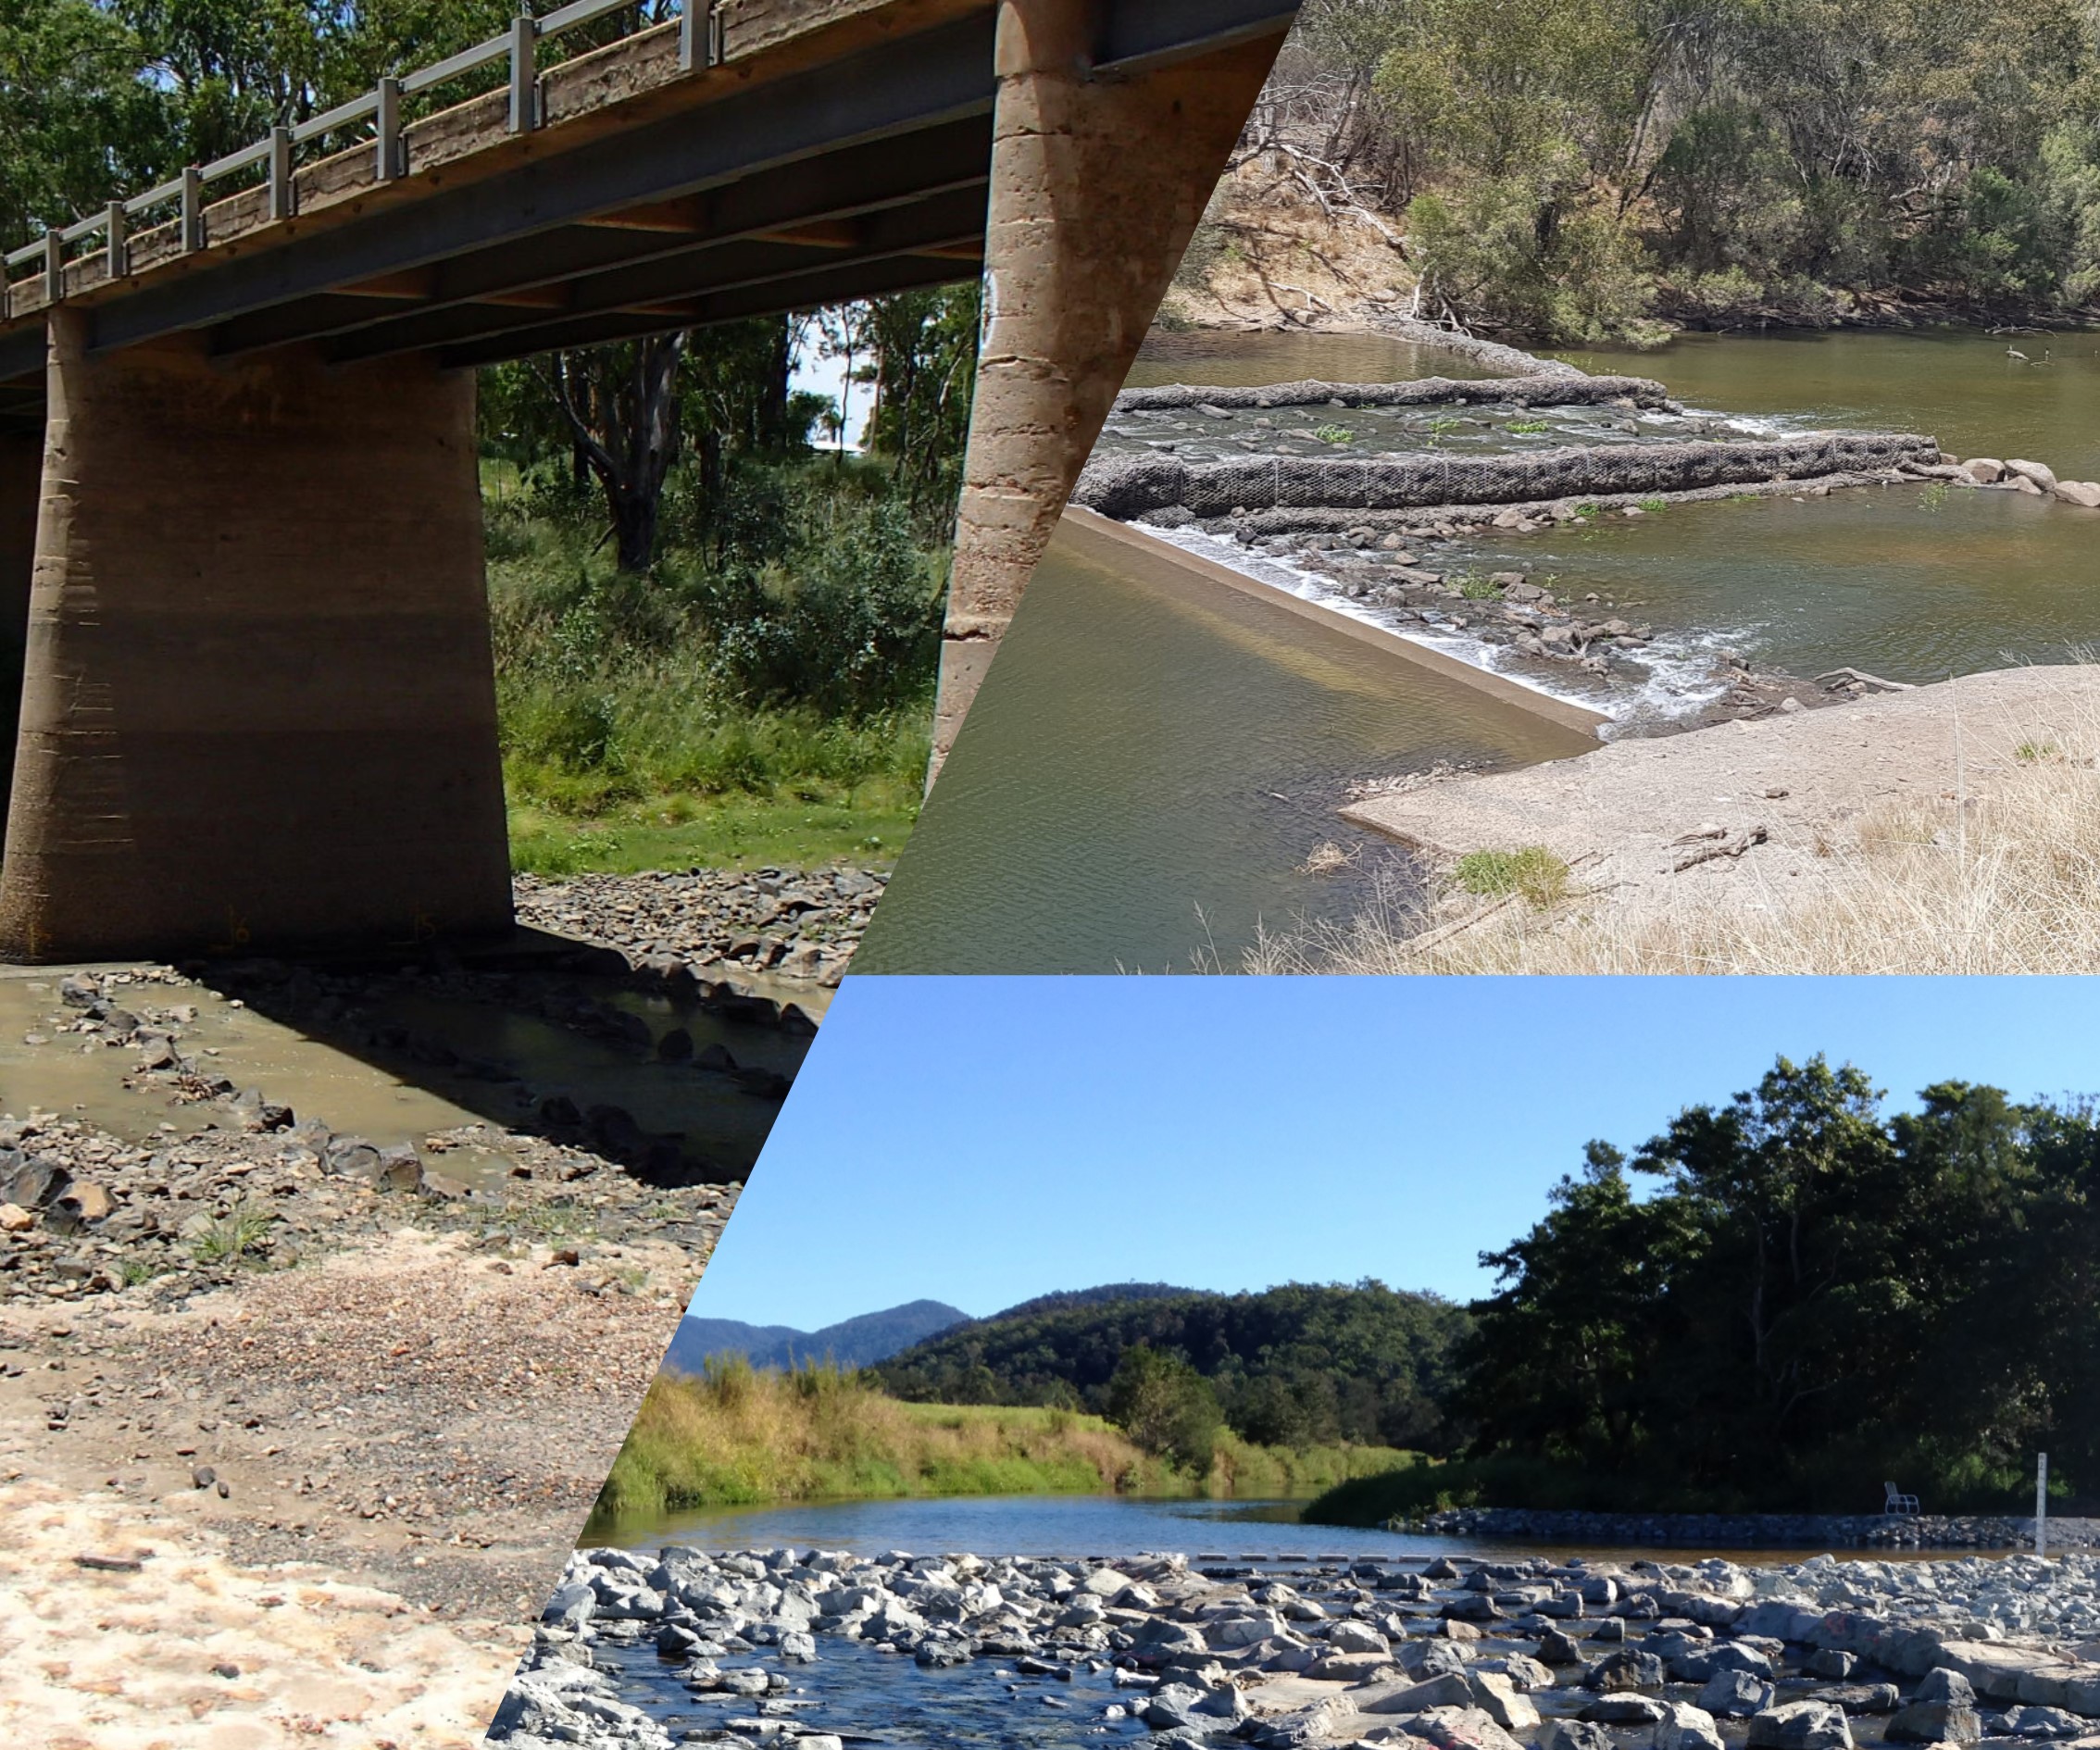 Rock Ramp examples: <br>
		1. Left: full width lateral ridge rock ramp, Condamine Weir, Condamine, Queensland<br> 
		2. Top right: partial width lateral ridge rock ramp, Goondiwindi weir, Macintyre River, Queensland<br> 
		3. Bottom right: full width rock ramp fishway with low flow lateral ridge channel down the centre and high flow random rock graded ramp on both banks, Clews Road, Murray Creek, Queensland Photo by 1 and 2 Janice Kerr and 3 Matthew Moore